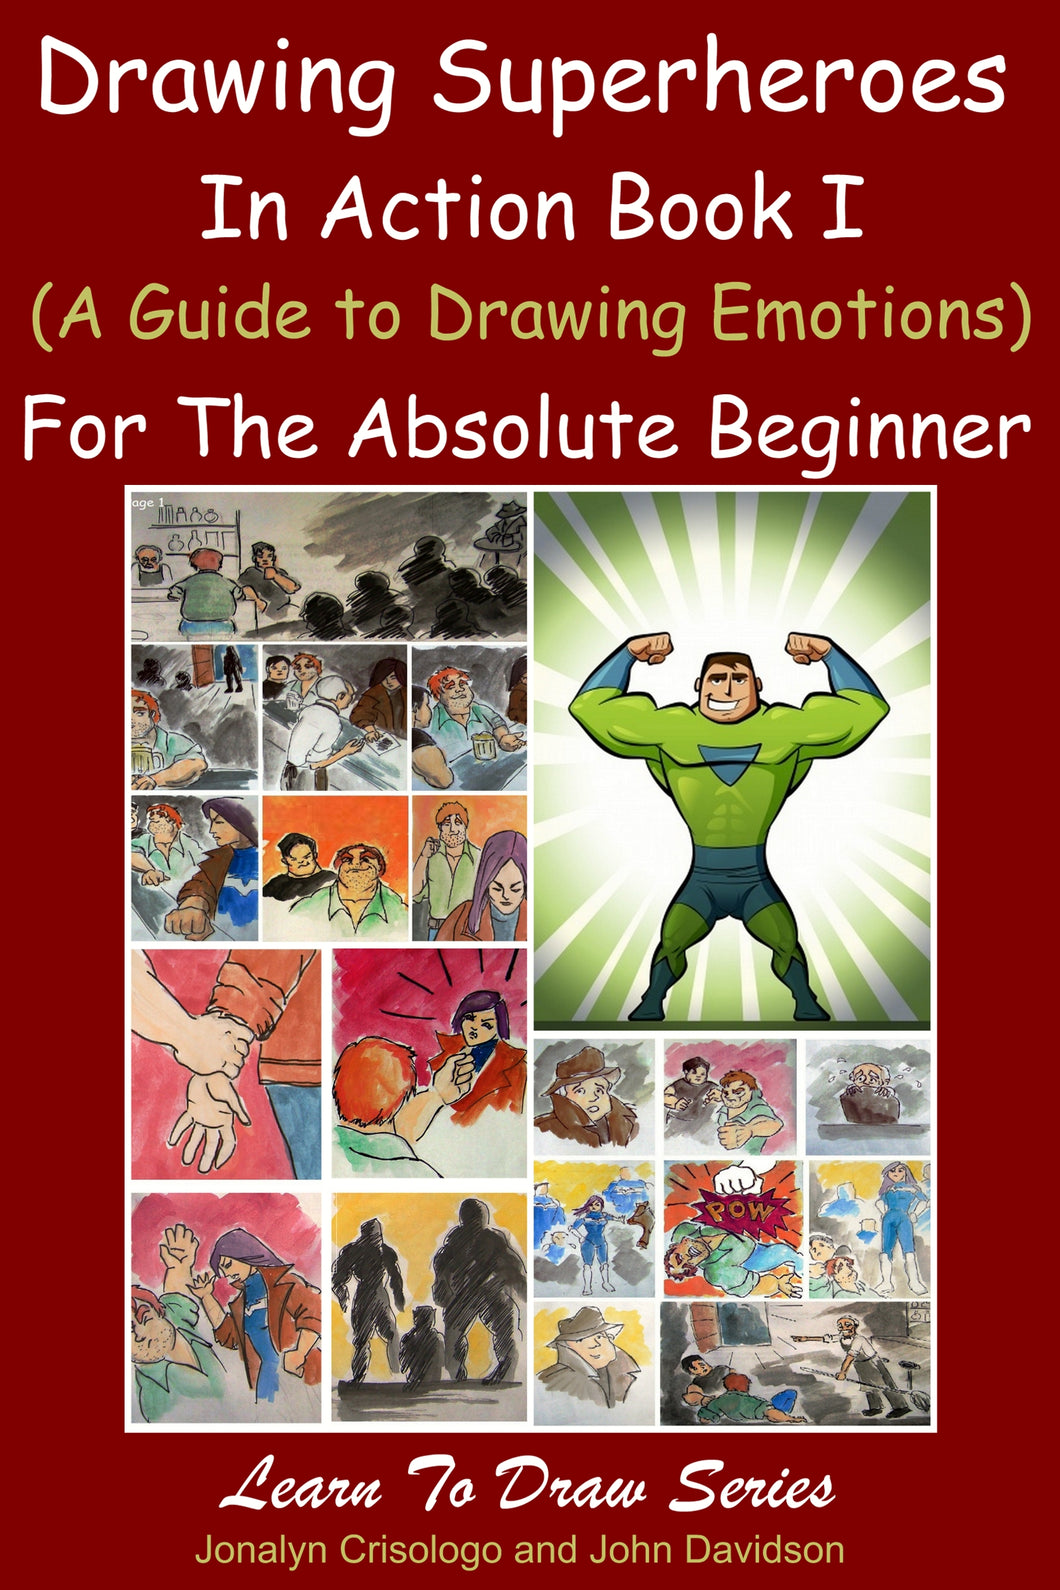 Drawing Superheroes in Action Book I (A Guide to Drawing Emotions) For the Absolute Beginner